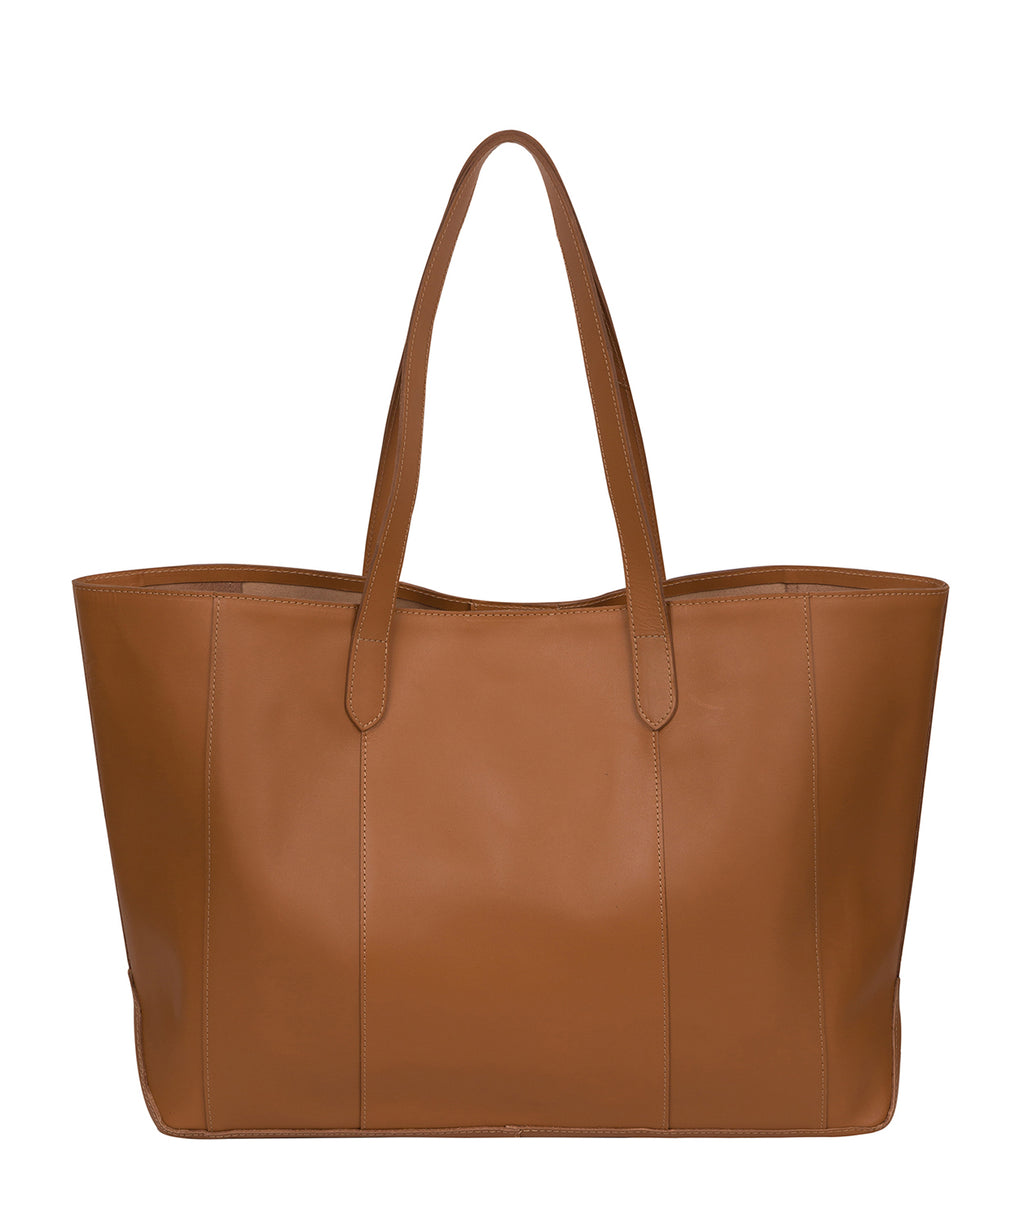 Tan Leather Tote Bag 'Ginny' by Conkca London – Pure Luxuries London